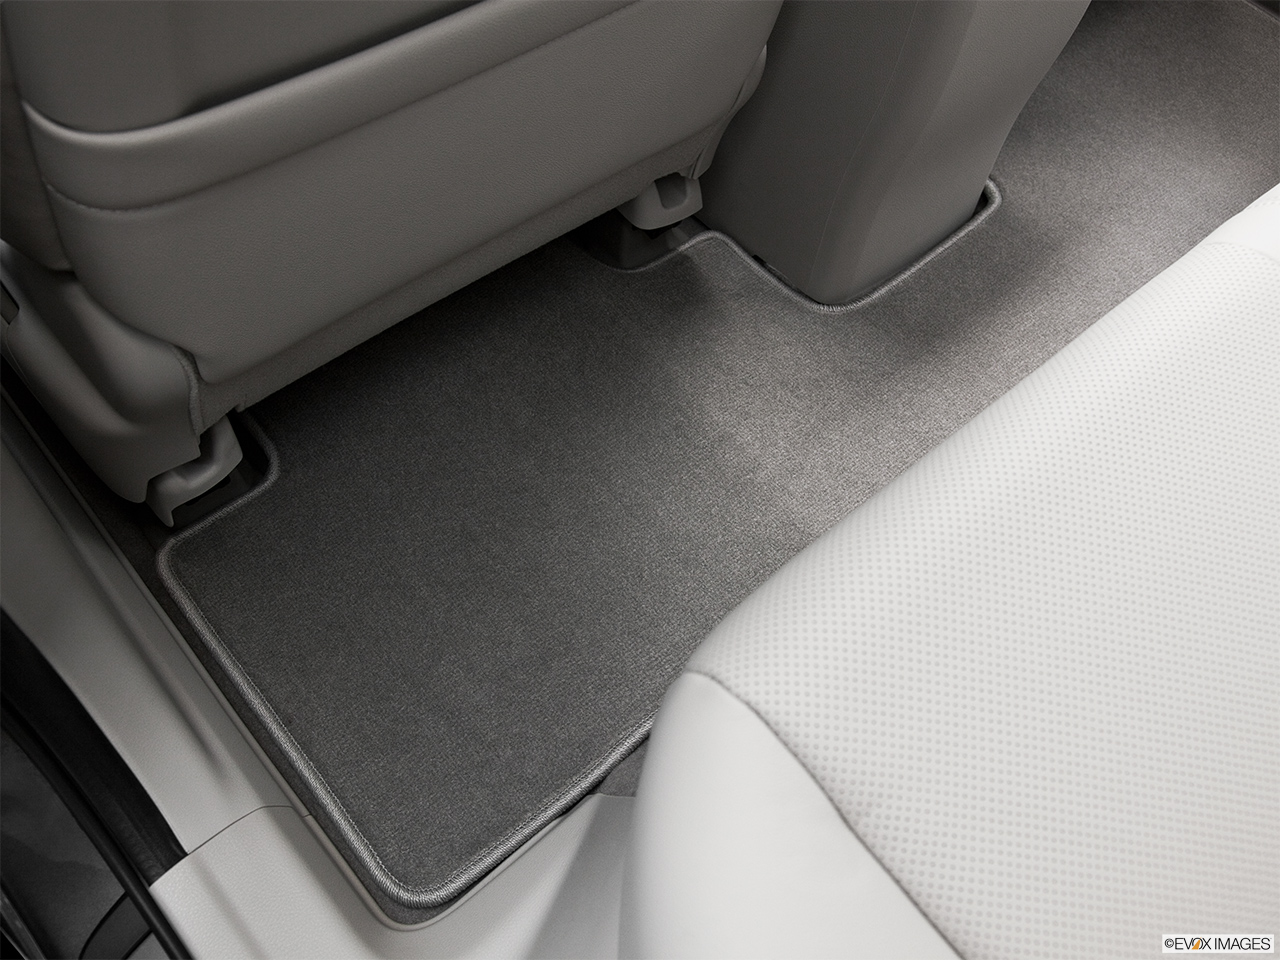 2011 Acura RDX RDX SH-AWD Rear driver's side floor mat. Mid-seat level from outside looking in. 